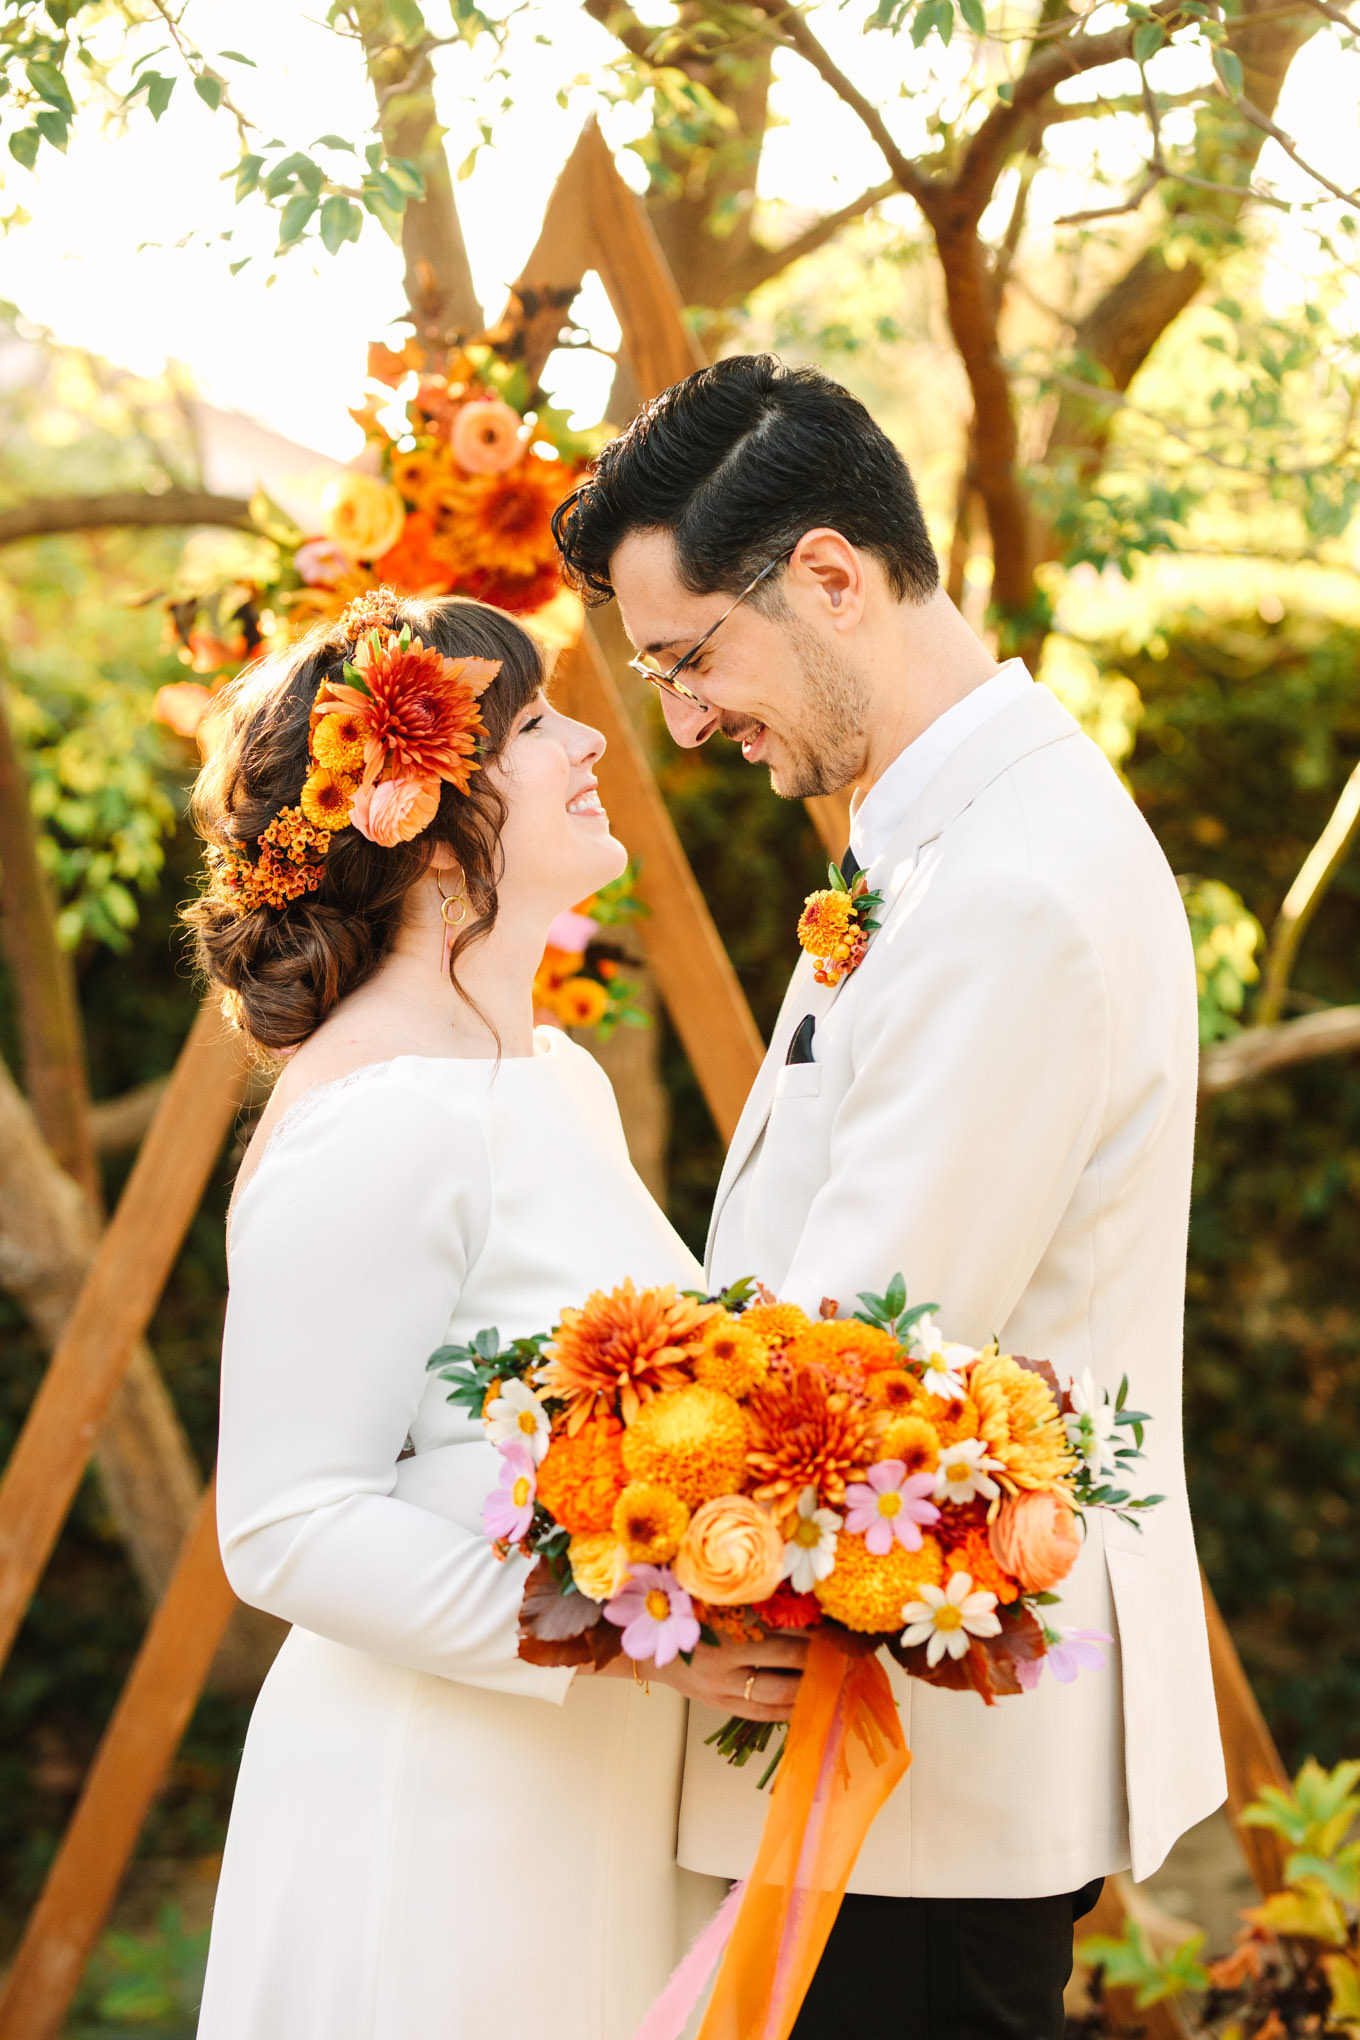 Close up portrait with unique wedding ceremony backdrop | Vibrant backyard micro wedding featured on Green Wedding Shoes | Colorful LA wedding photography | #losangeleswedding #backyardwedding #microwedding #laweddingphotographer Source: Mary Costa Photography | Los Angeles